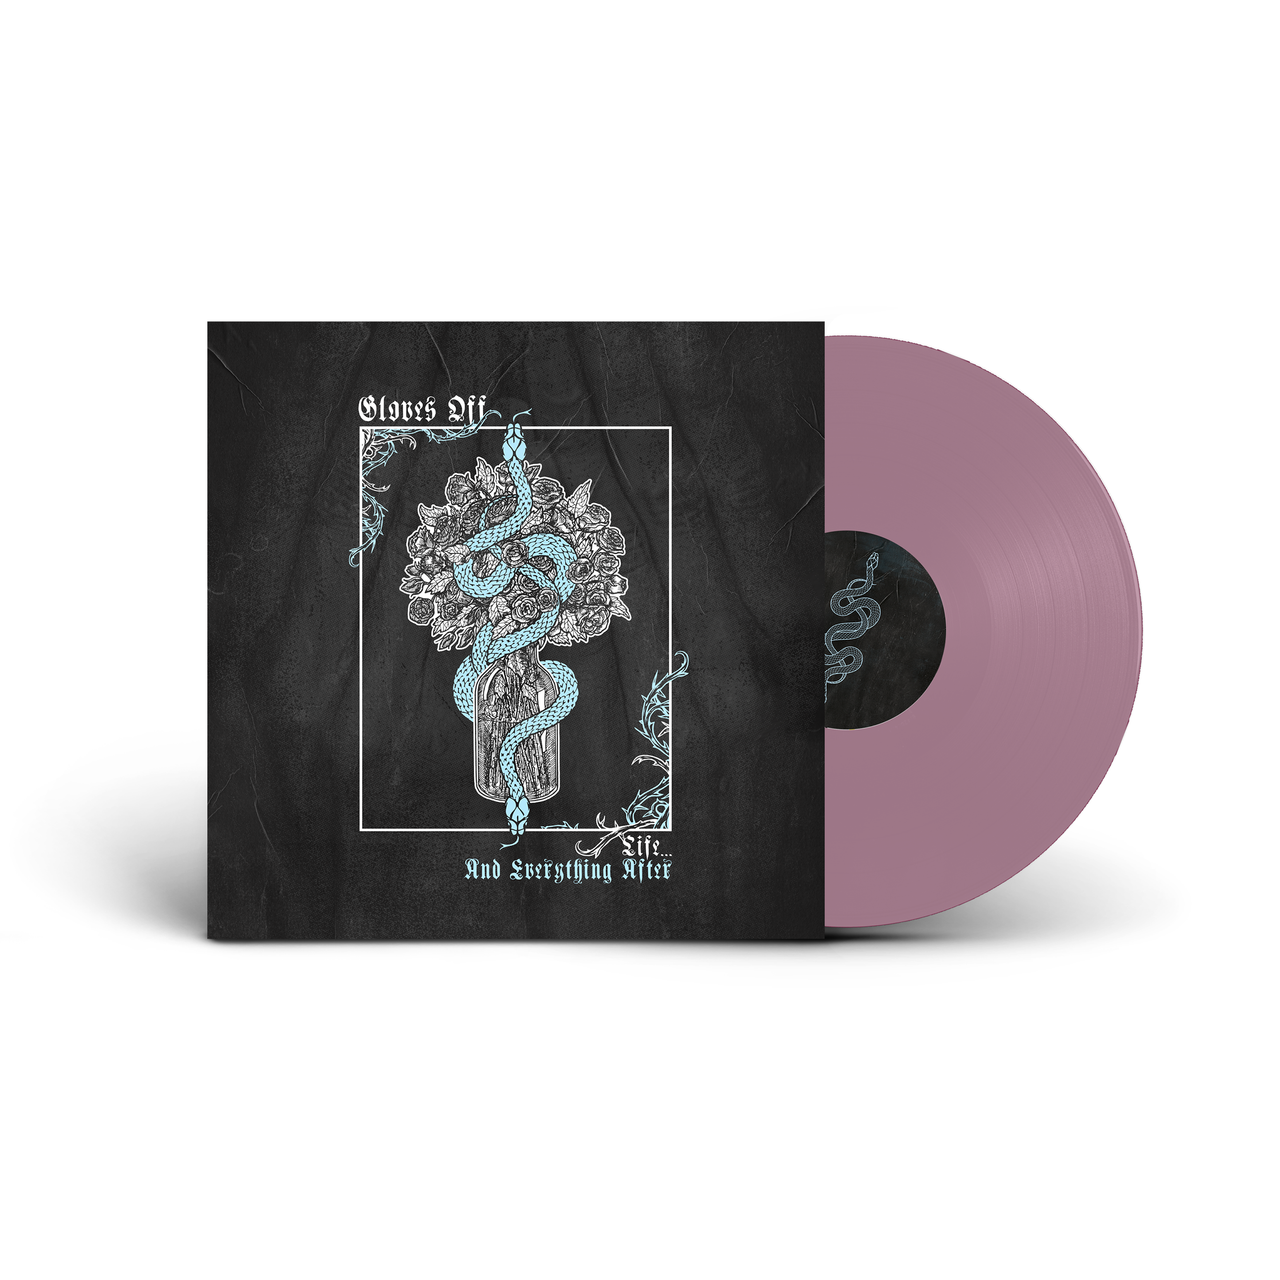 Gloves Off "Life...And Everything After" 12" Vinyl